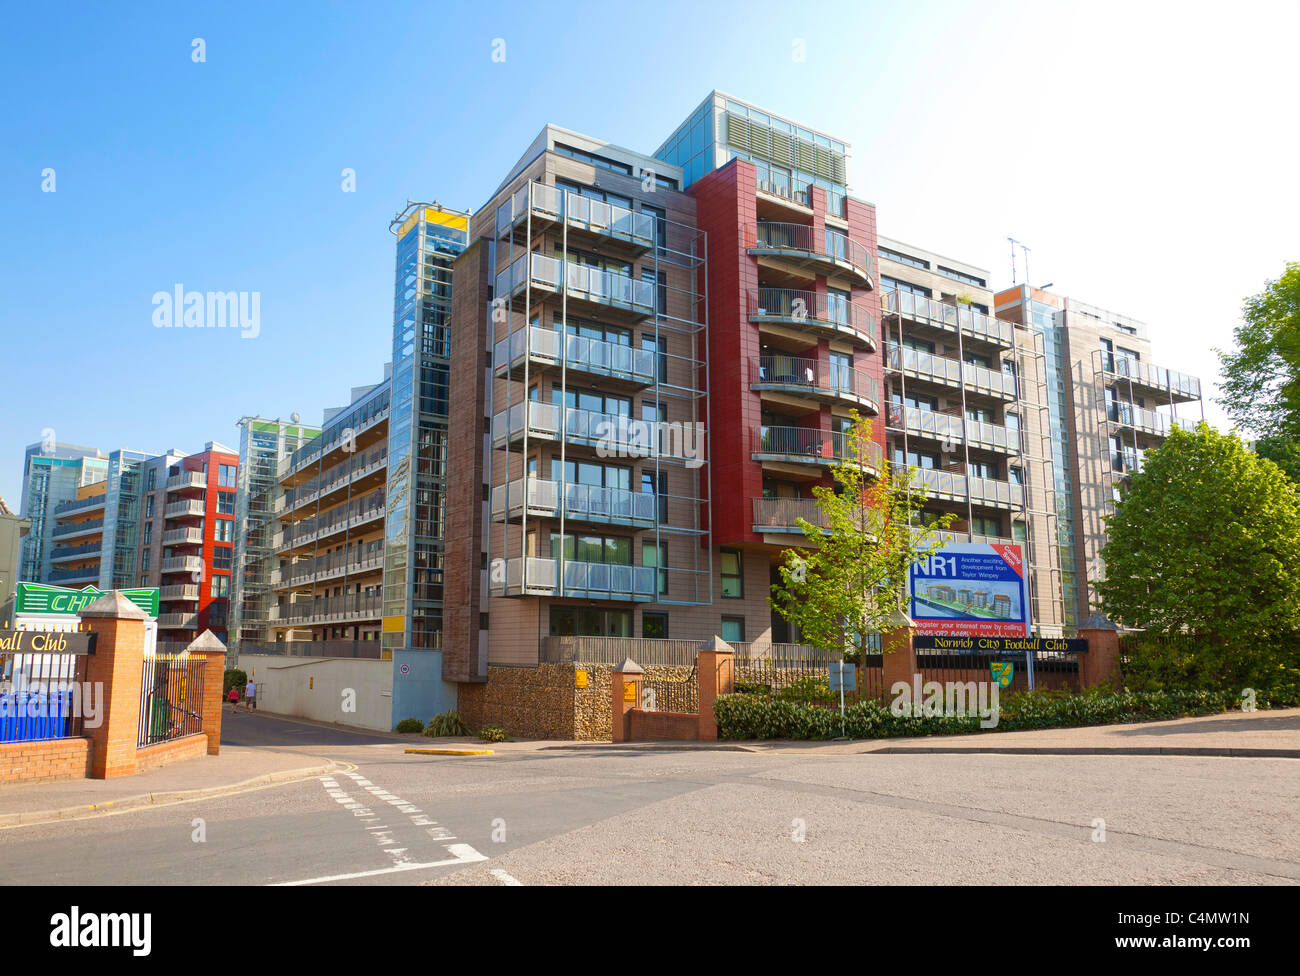 NR1 Riverside Heights Apartments in Norwich Stockfoto